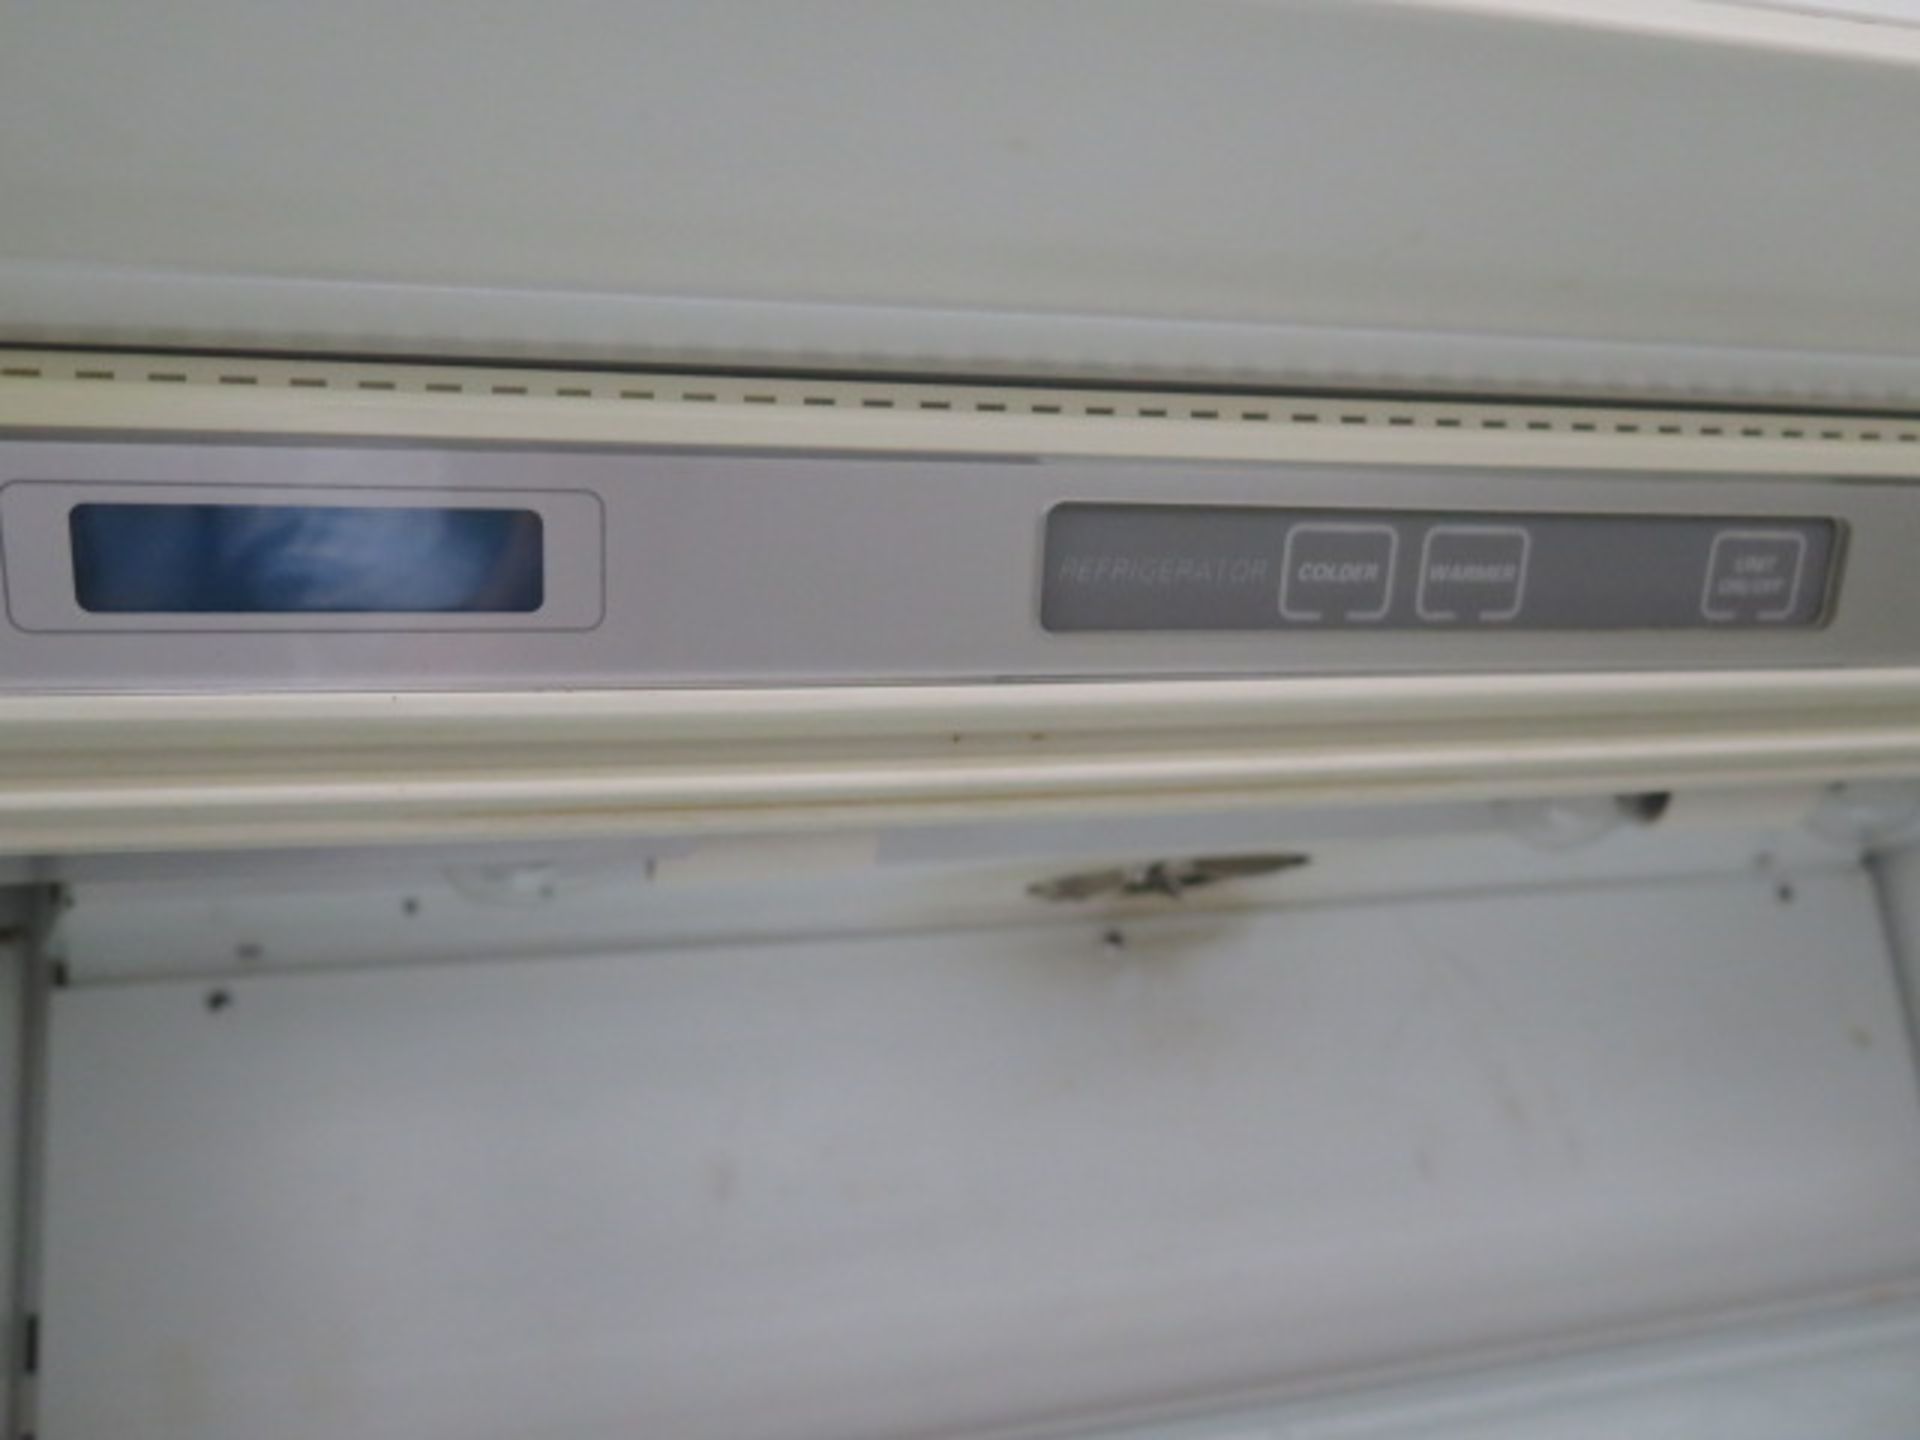 Sub-Zero mdl. 601R Stainless Steel Refrigerator - Image 3 of 4